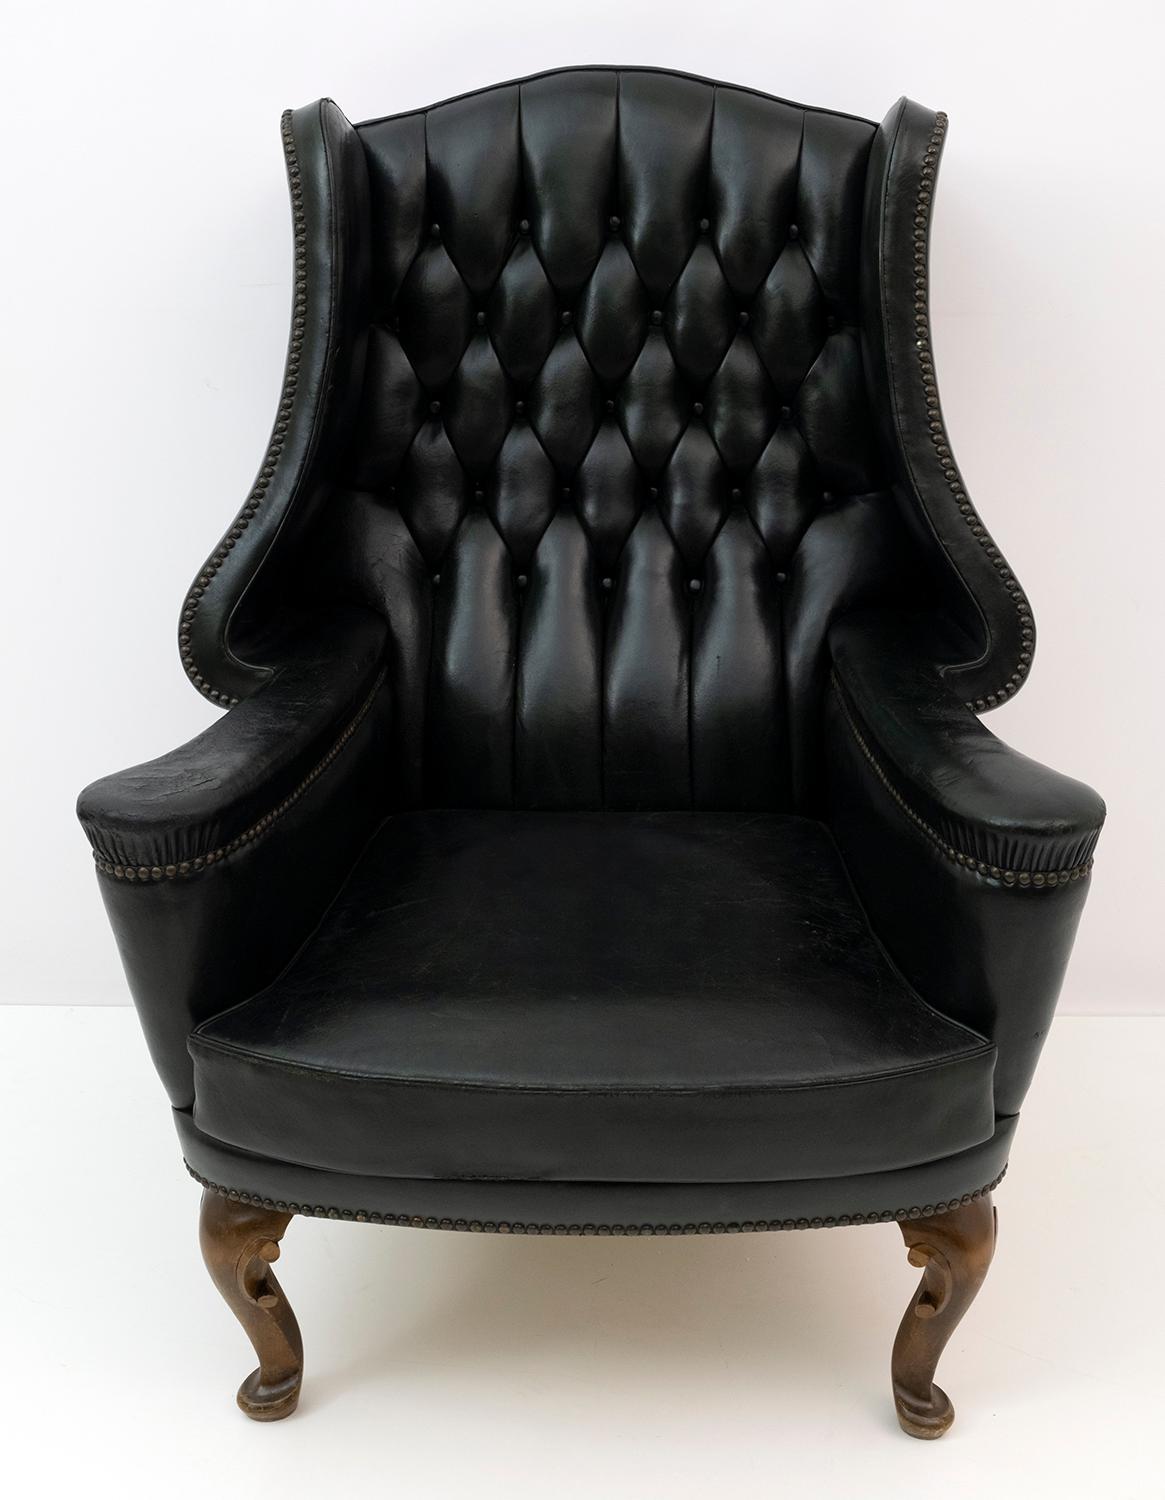 English Georgian Style Rare Original Chesterfield Leather Armchair, 1950s For Sale